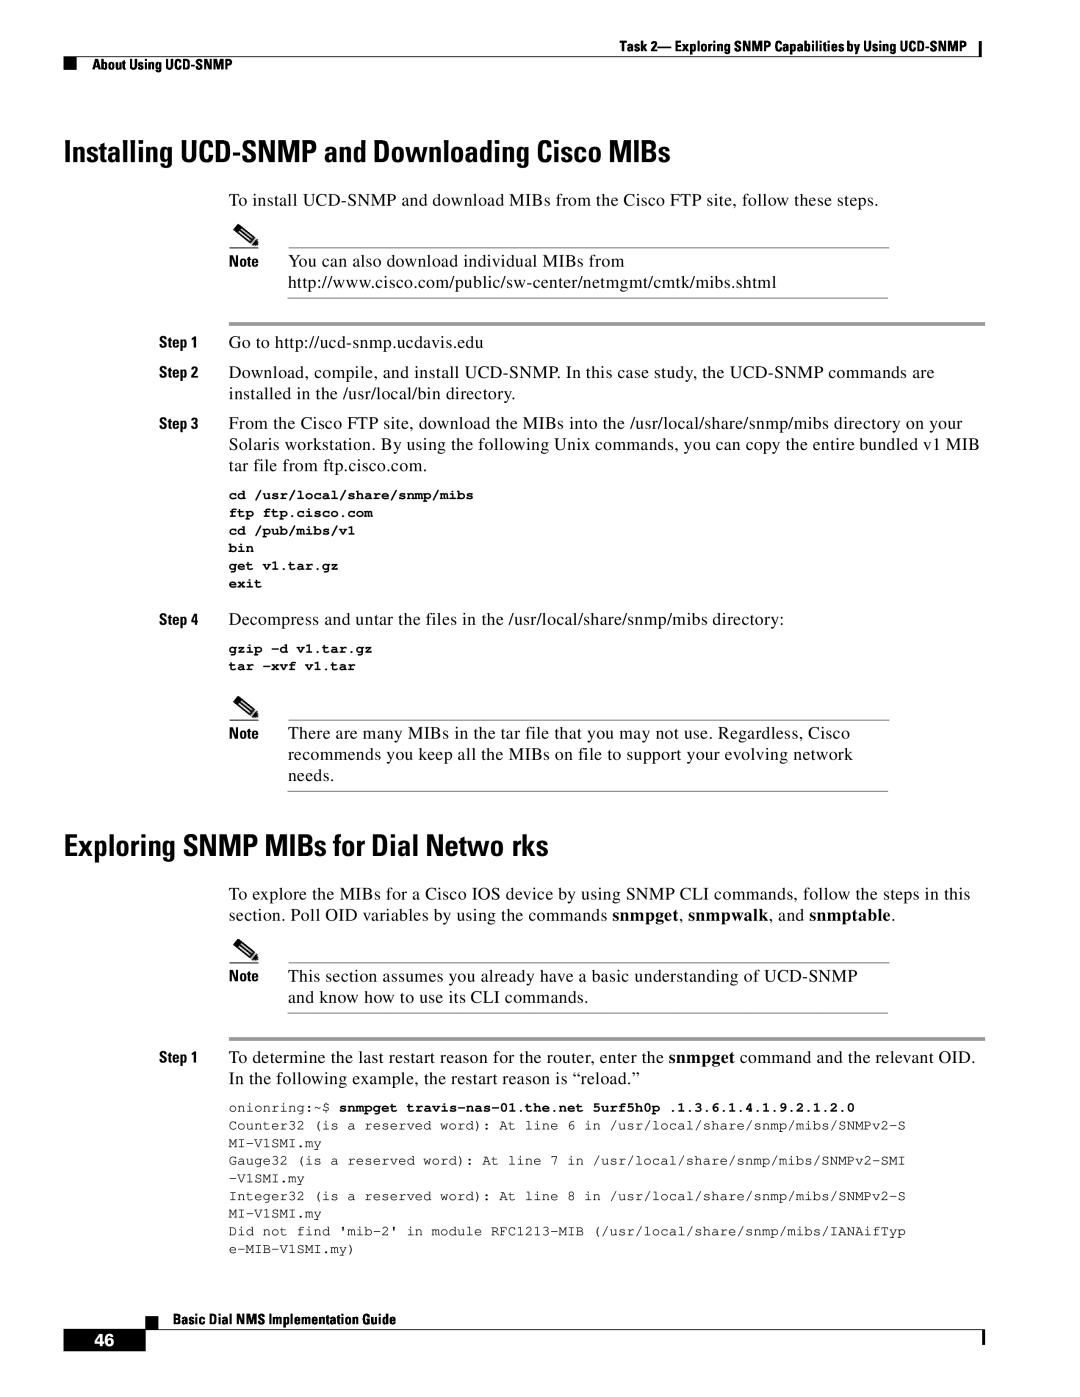 Cisco Systems Dial NMS manual Installing UCD-SNMP and Downloading Cisco MIBs, Exploring SNMP MIBs for Dial Netwo rks 